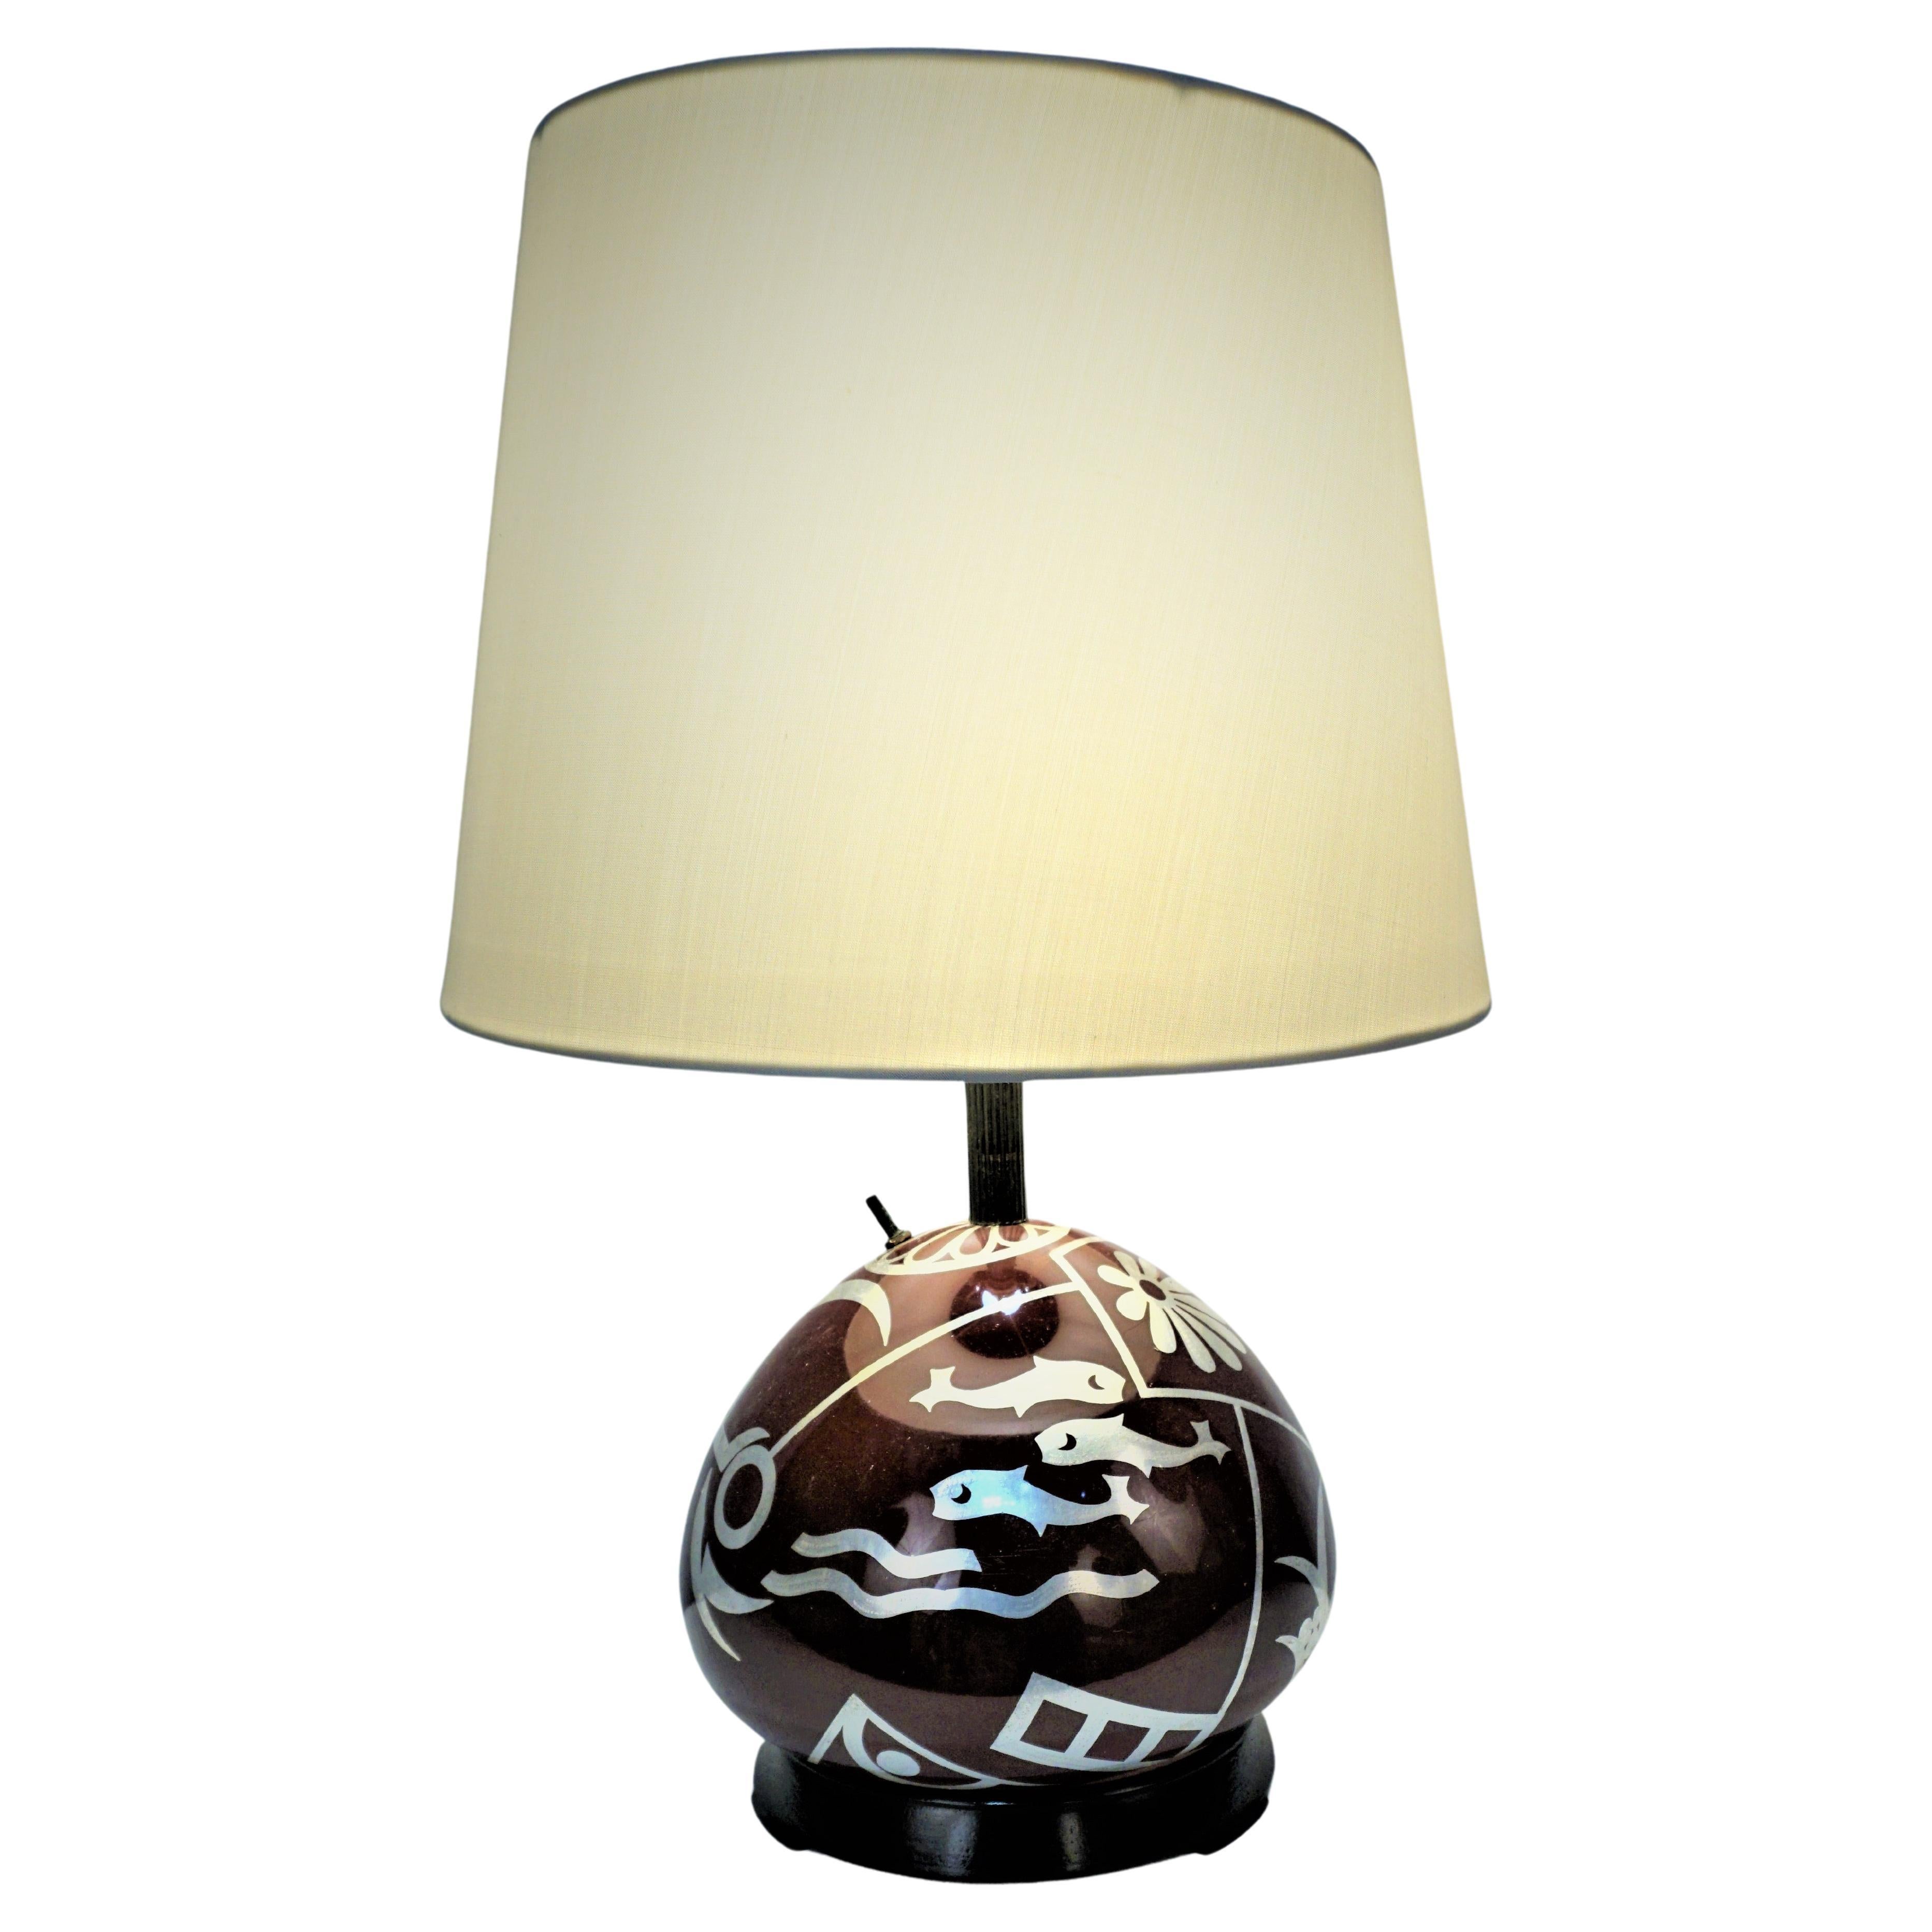 Art Deco WMF Paul Haustein "Ikora" Silver Lacquer on Bronze Table Lamp. For Sale